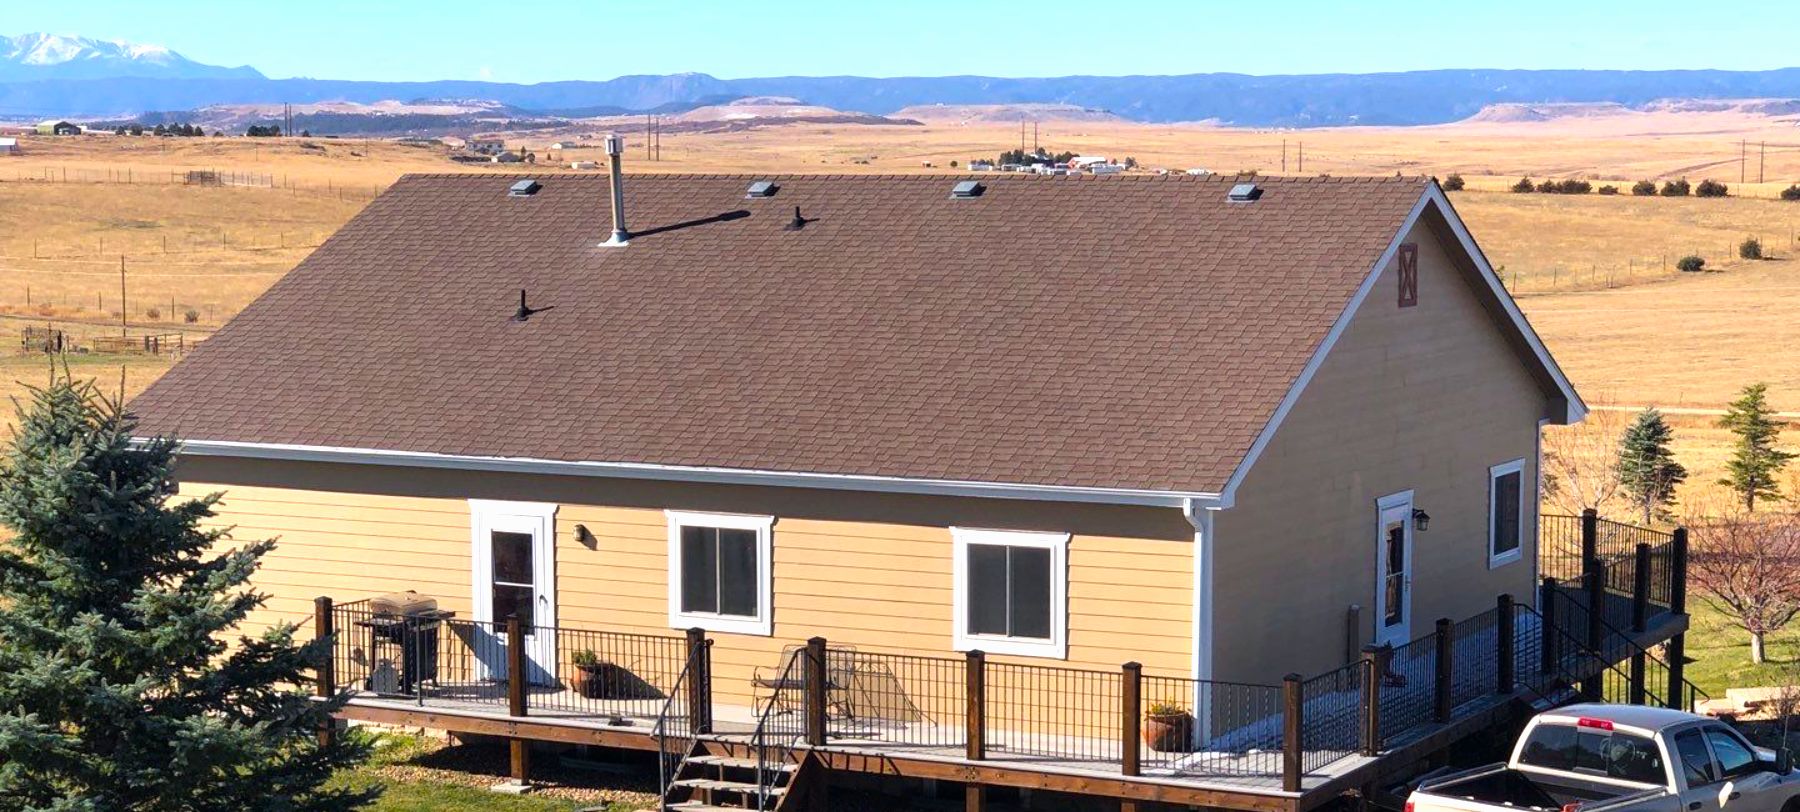 A house with a beautiful roof in colorado